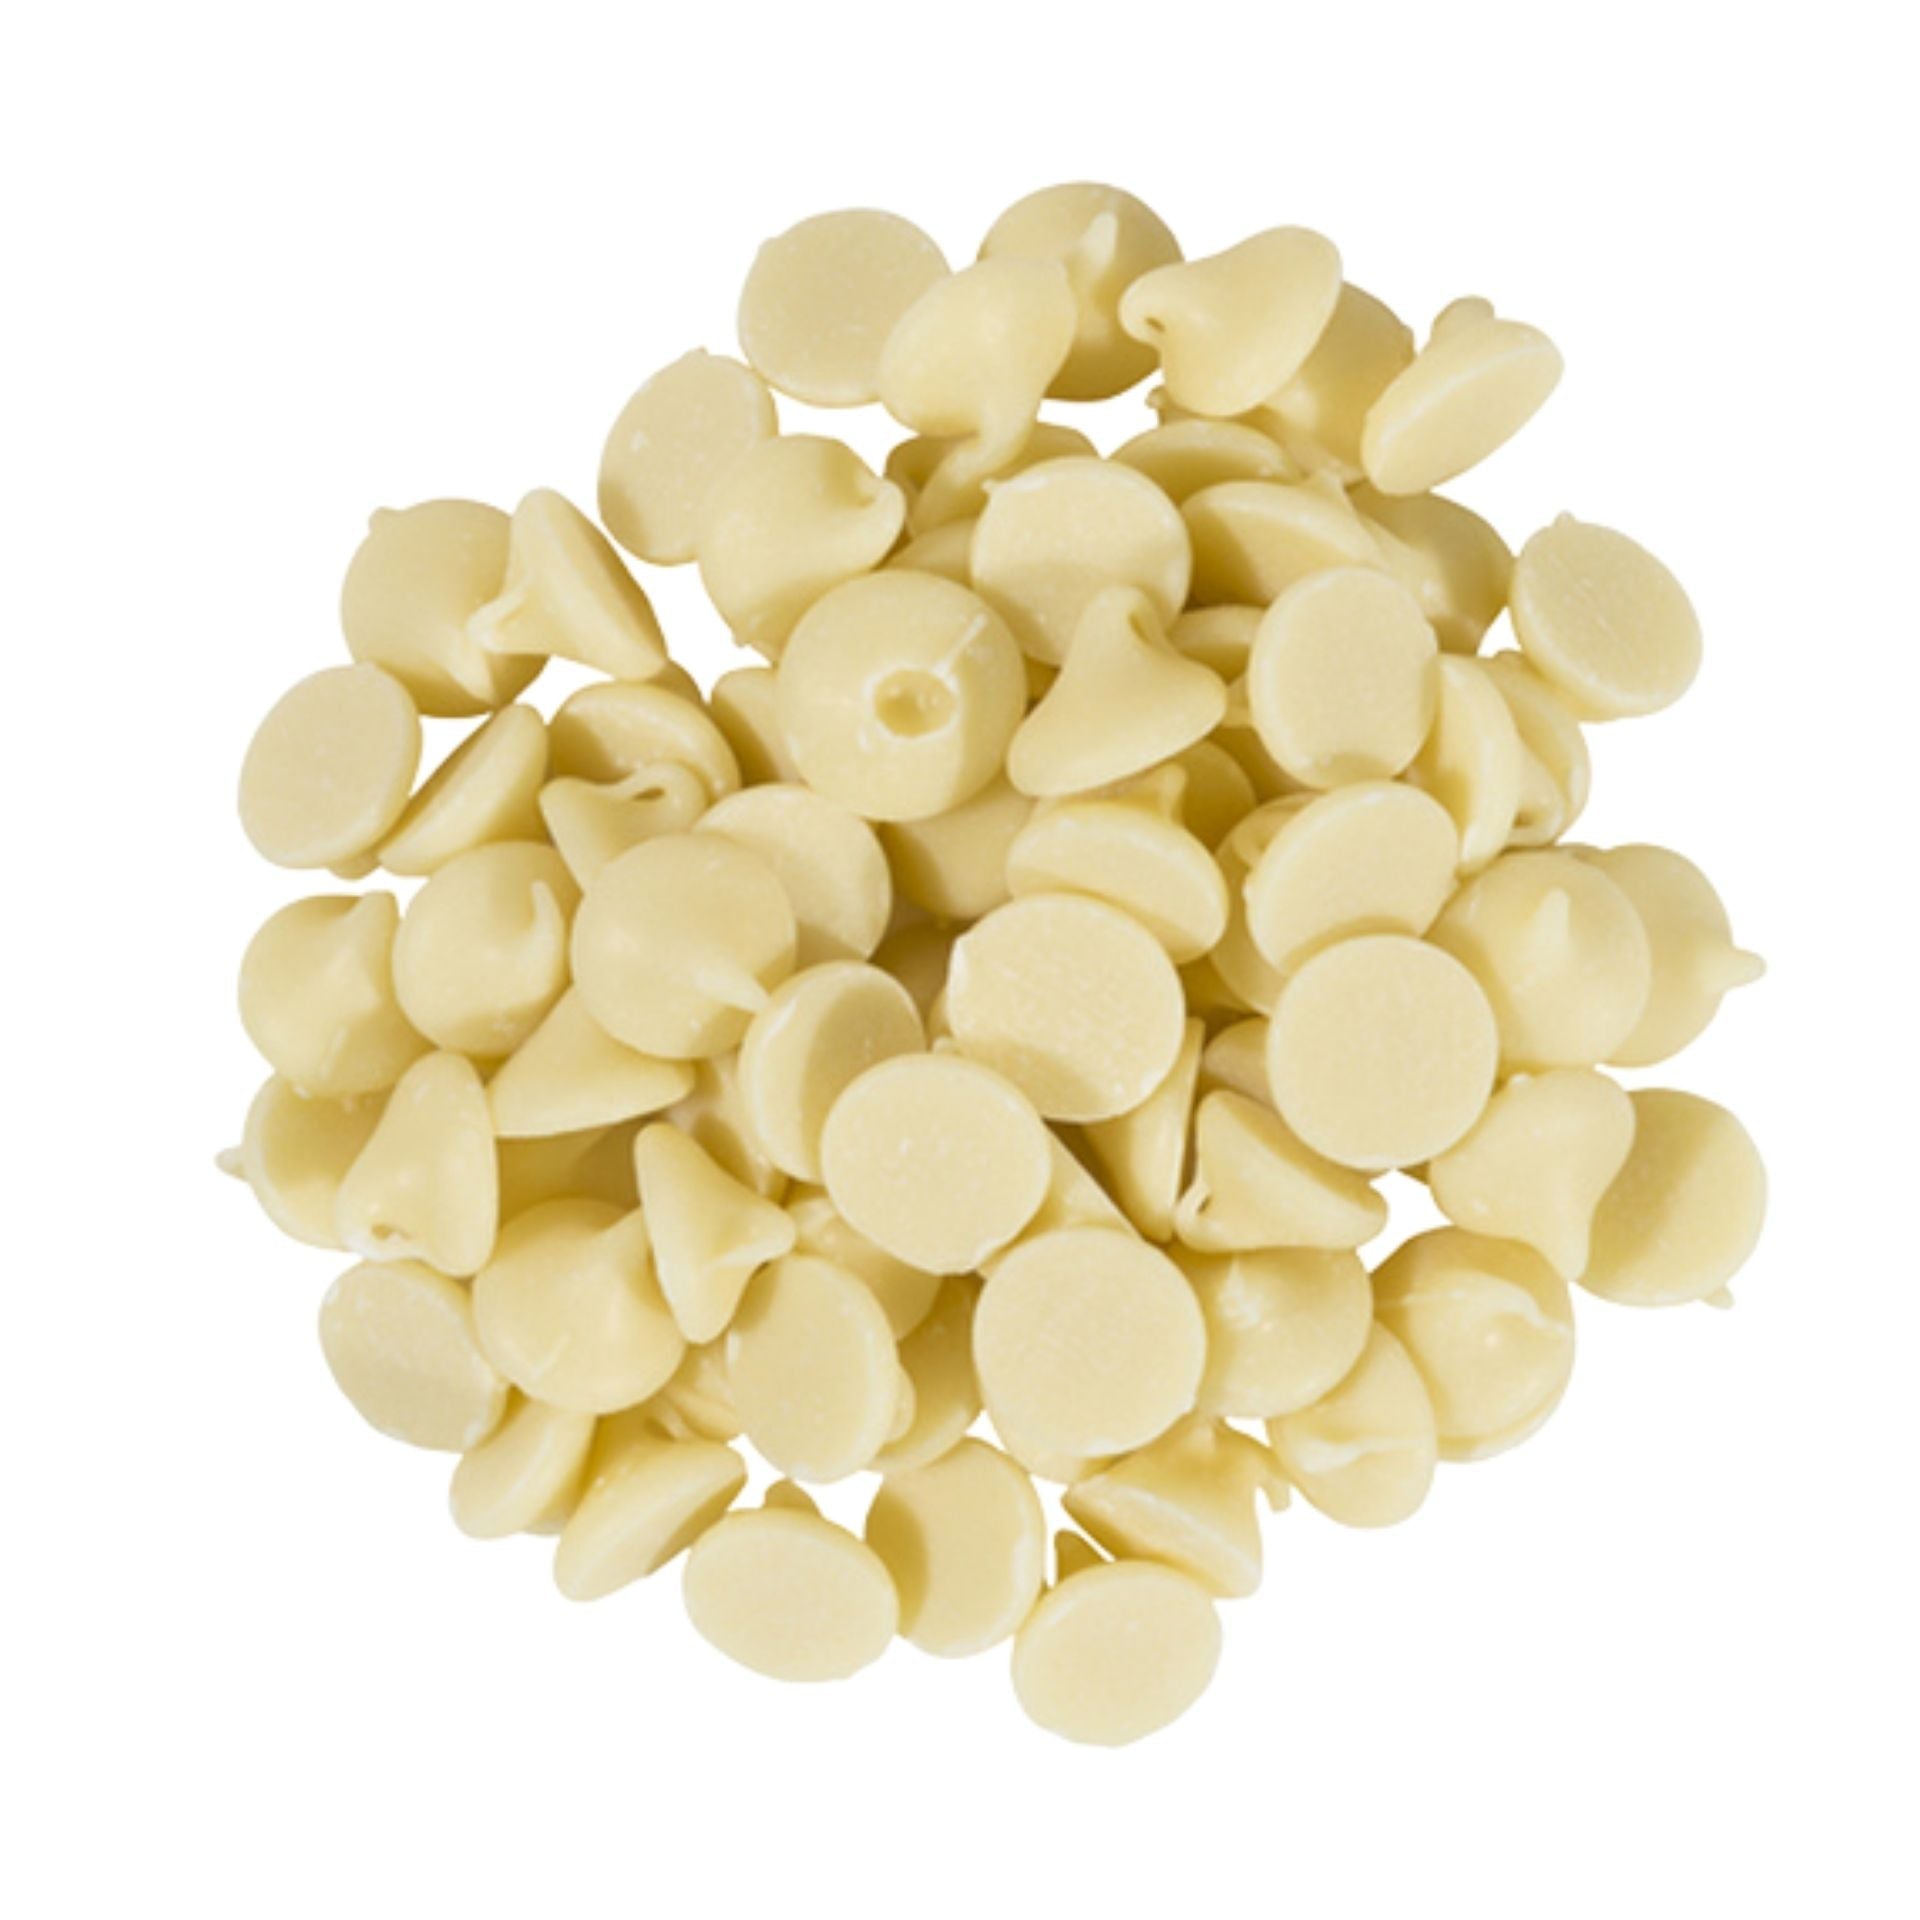  This is a White Chocolate Drops